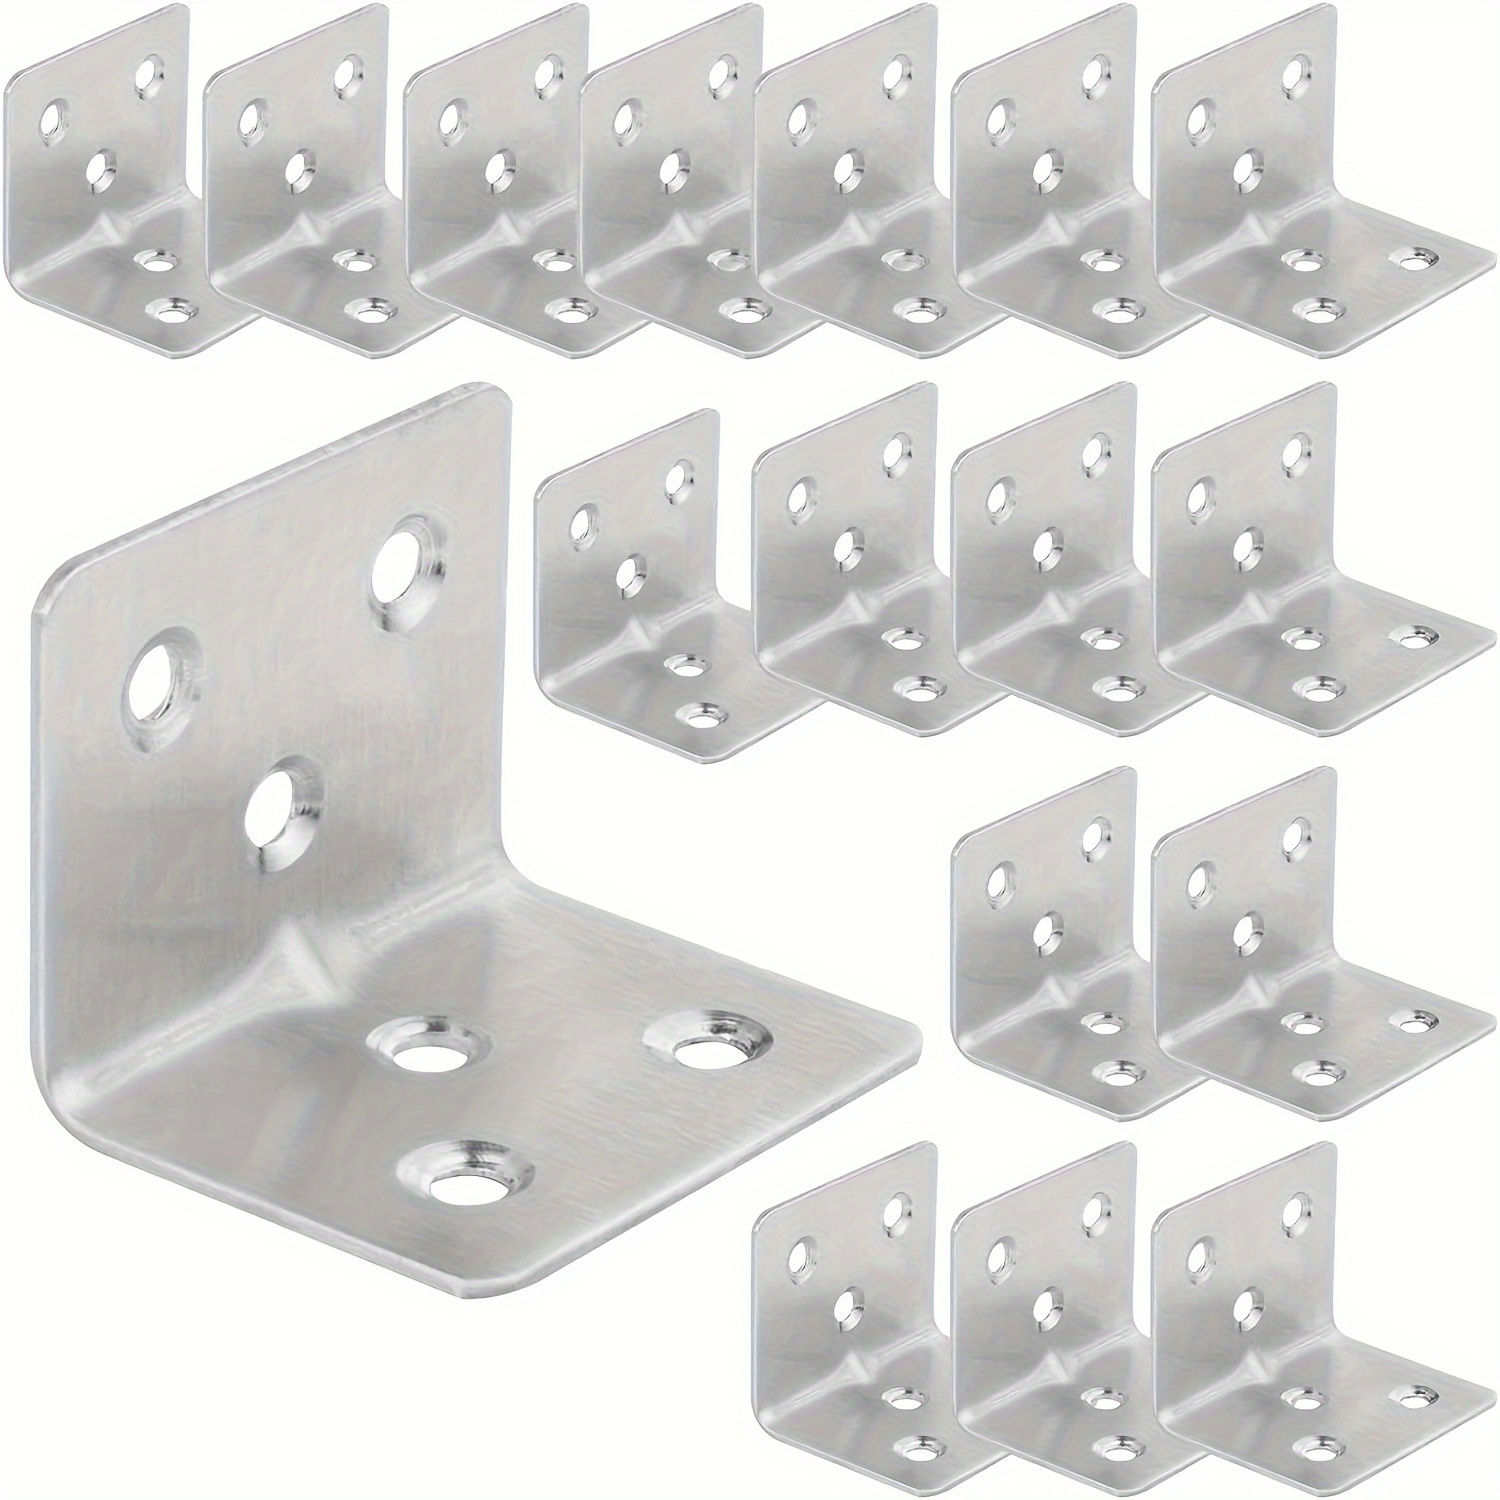 

robust" 20-piece Heavy Duty Stainless Steel Corner Braces, 1.5"x1.2" L-shaped Brackets With Screws - Ideal For Wood Furniture, Windows, Cabinets & Tables